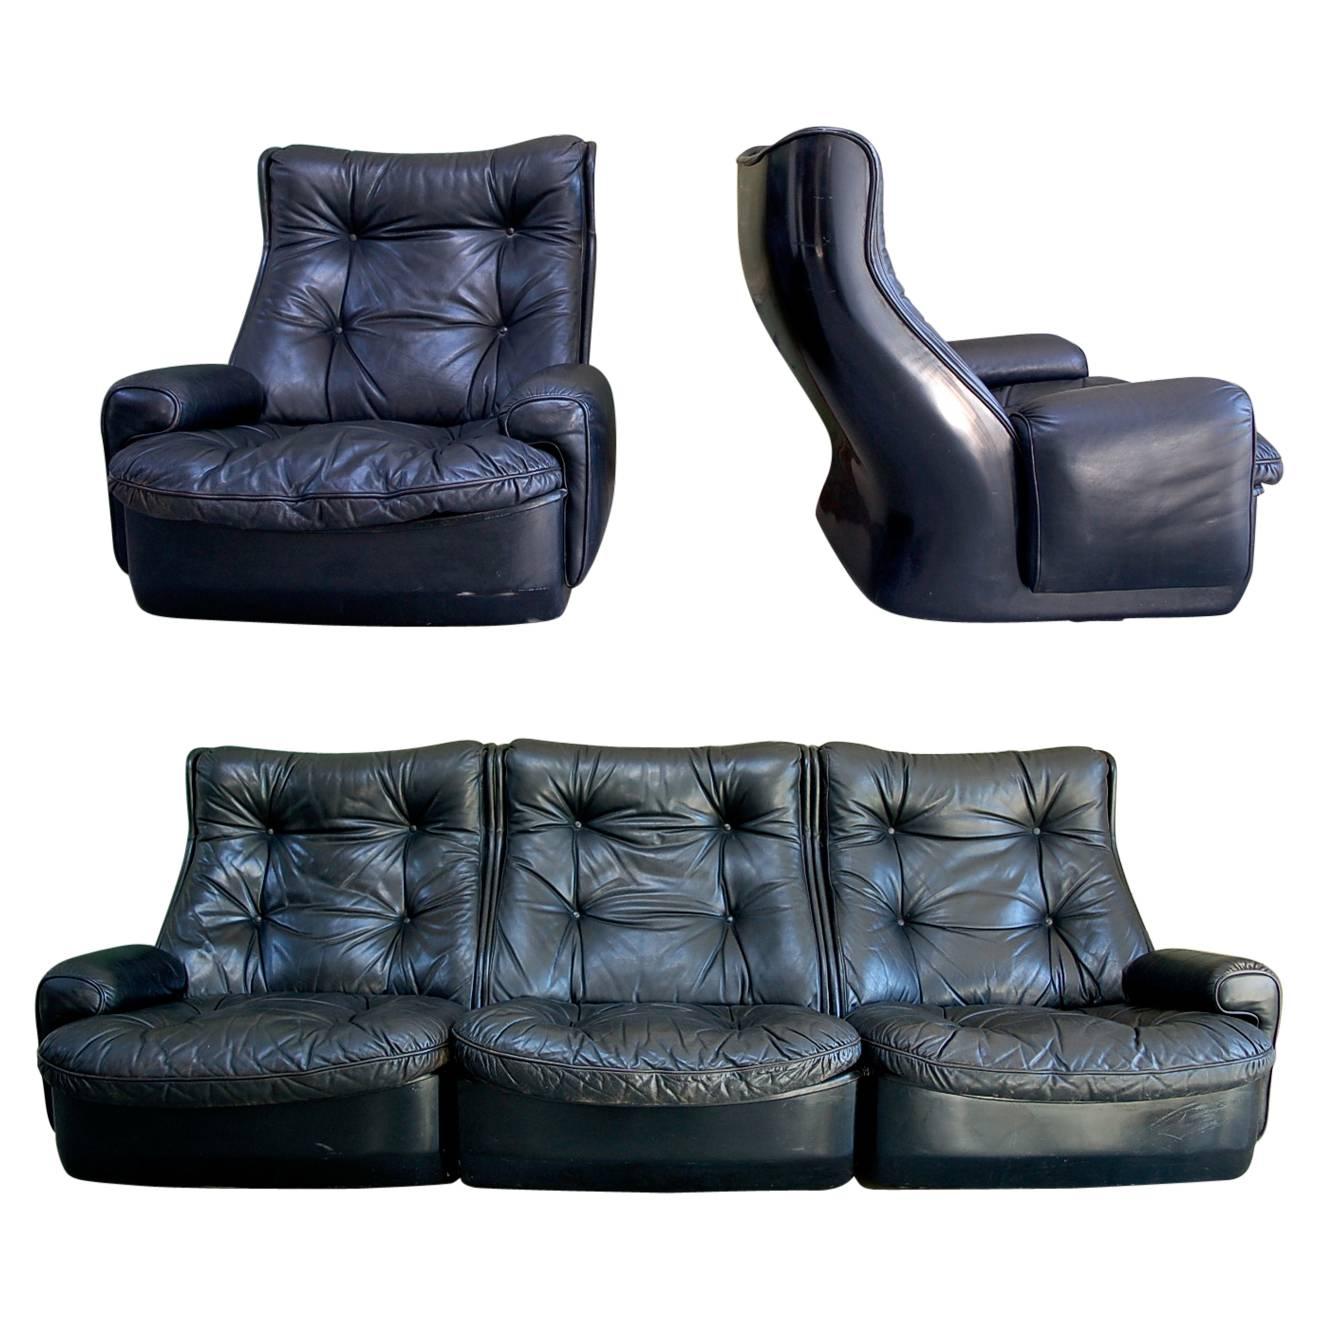 Modular Leather Lounge Set by Airborne International, circa 1970s For Sale